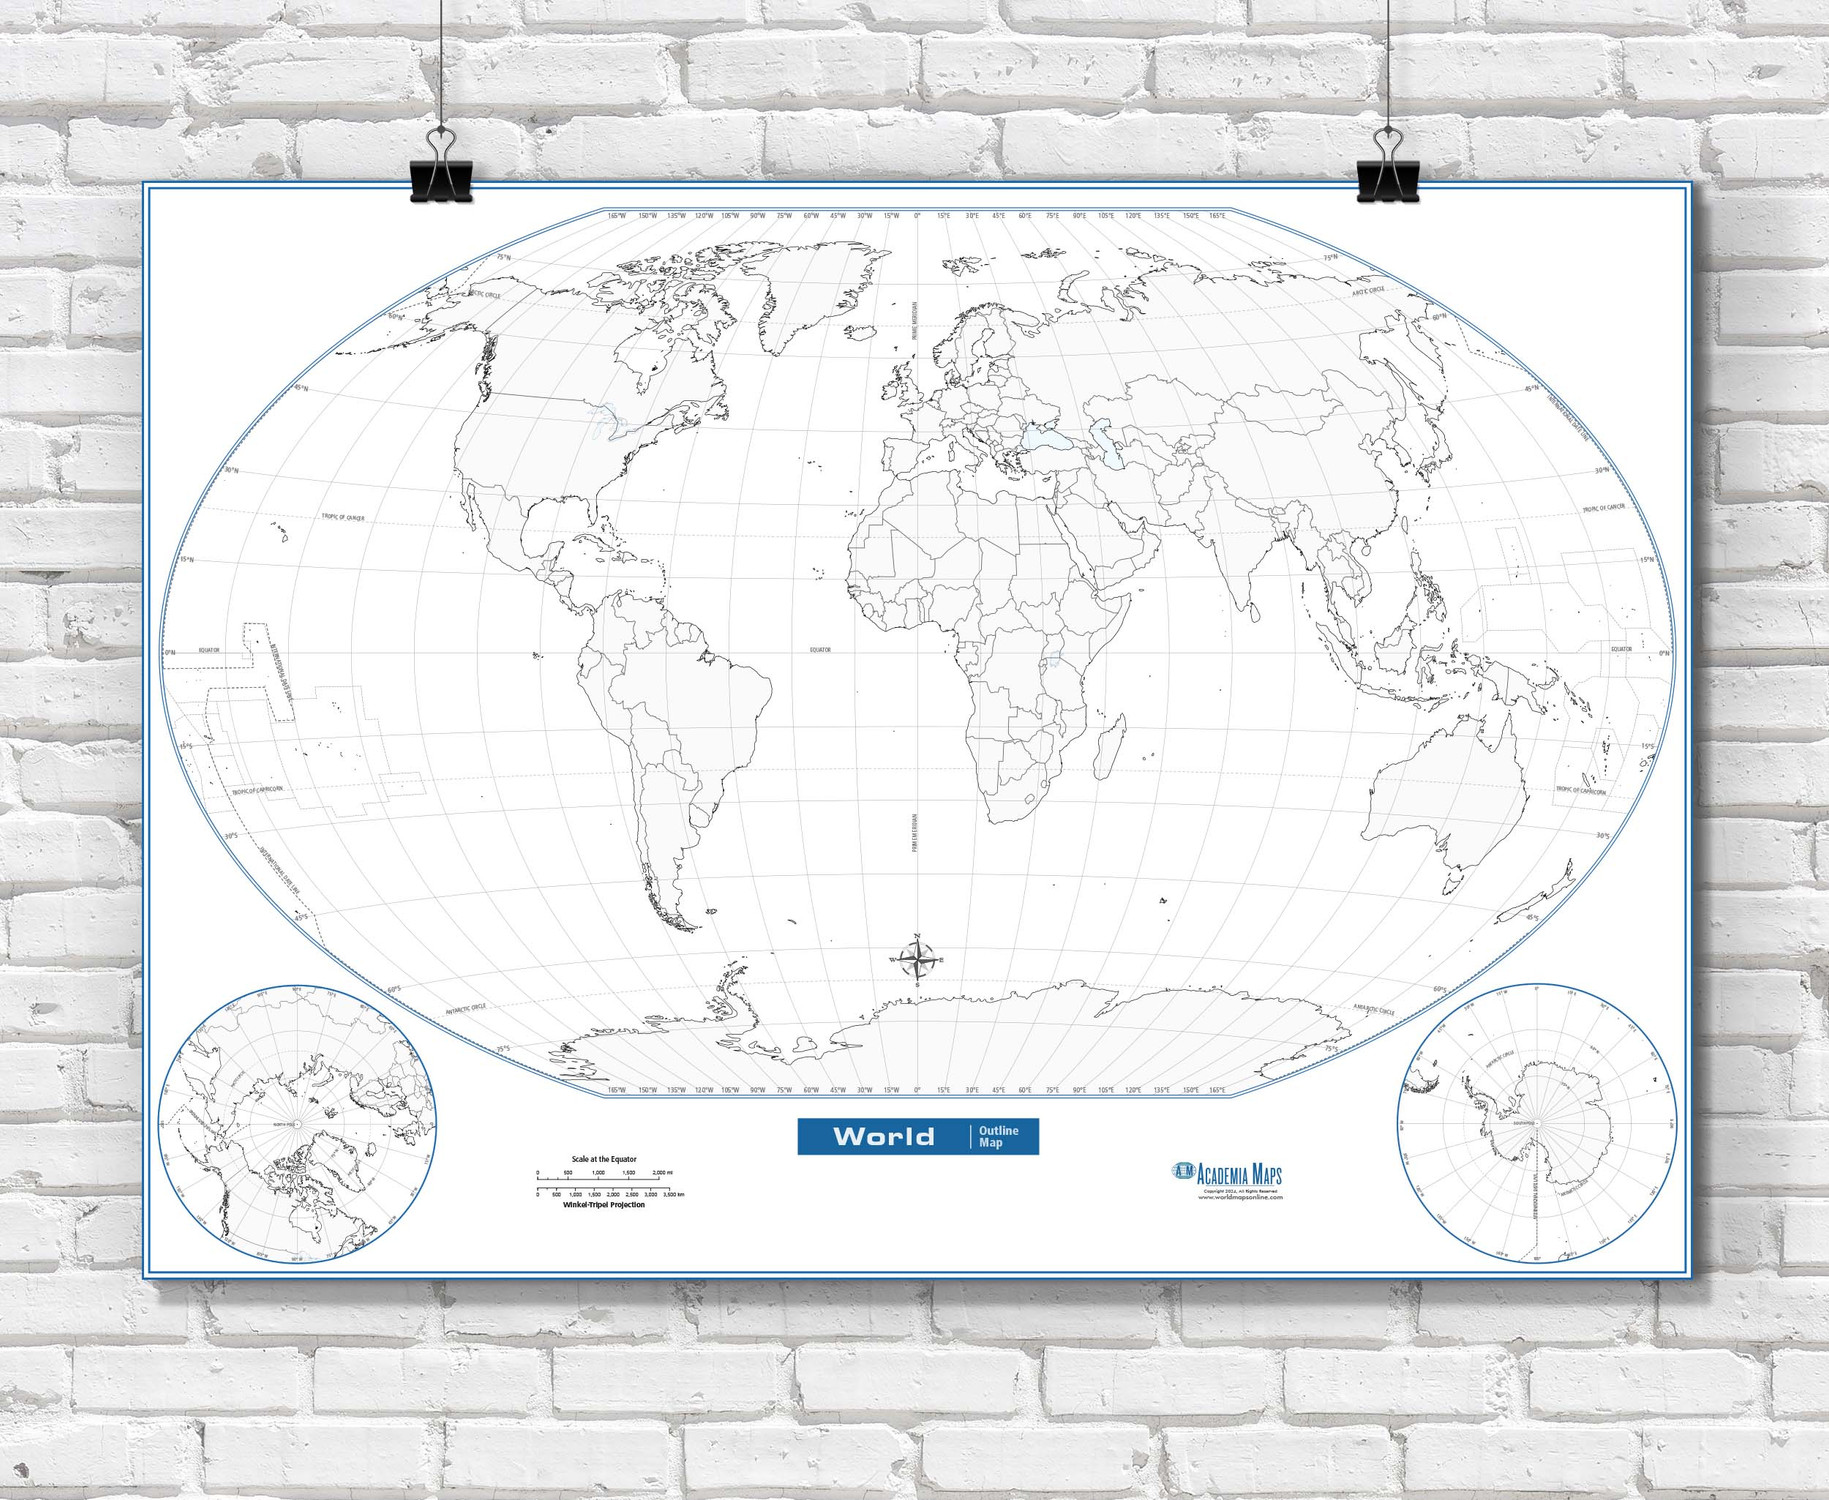 World Outline Map - Blank World Classroom Wall Map Poster